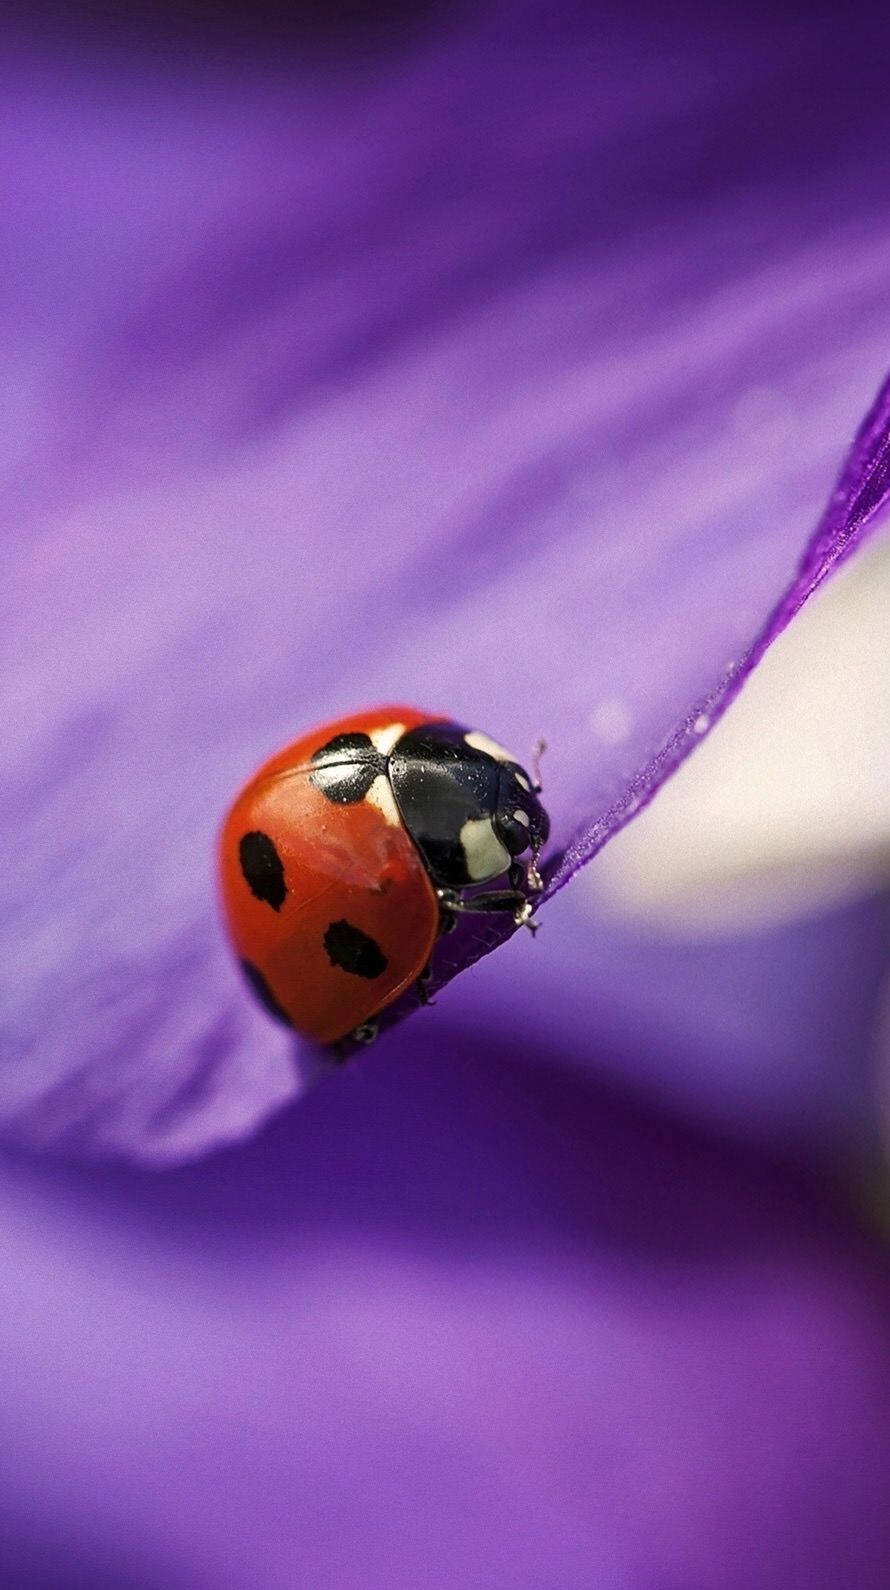 Ladybug Insect On A Purple Petal Background